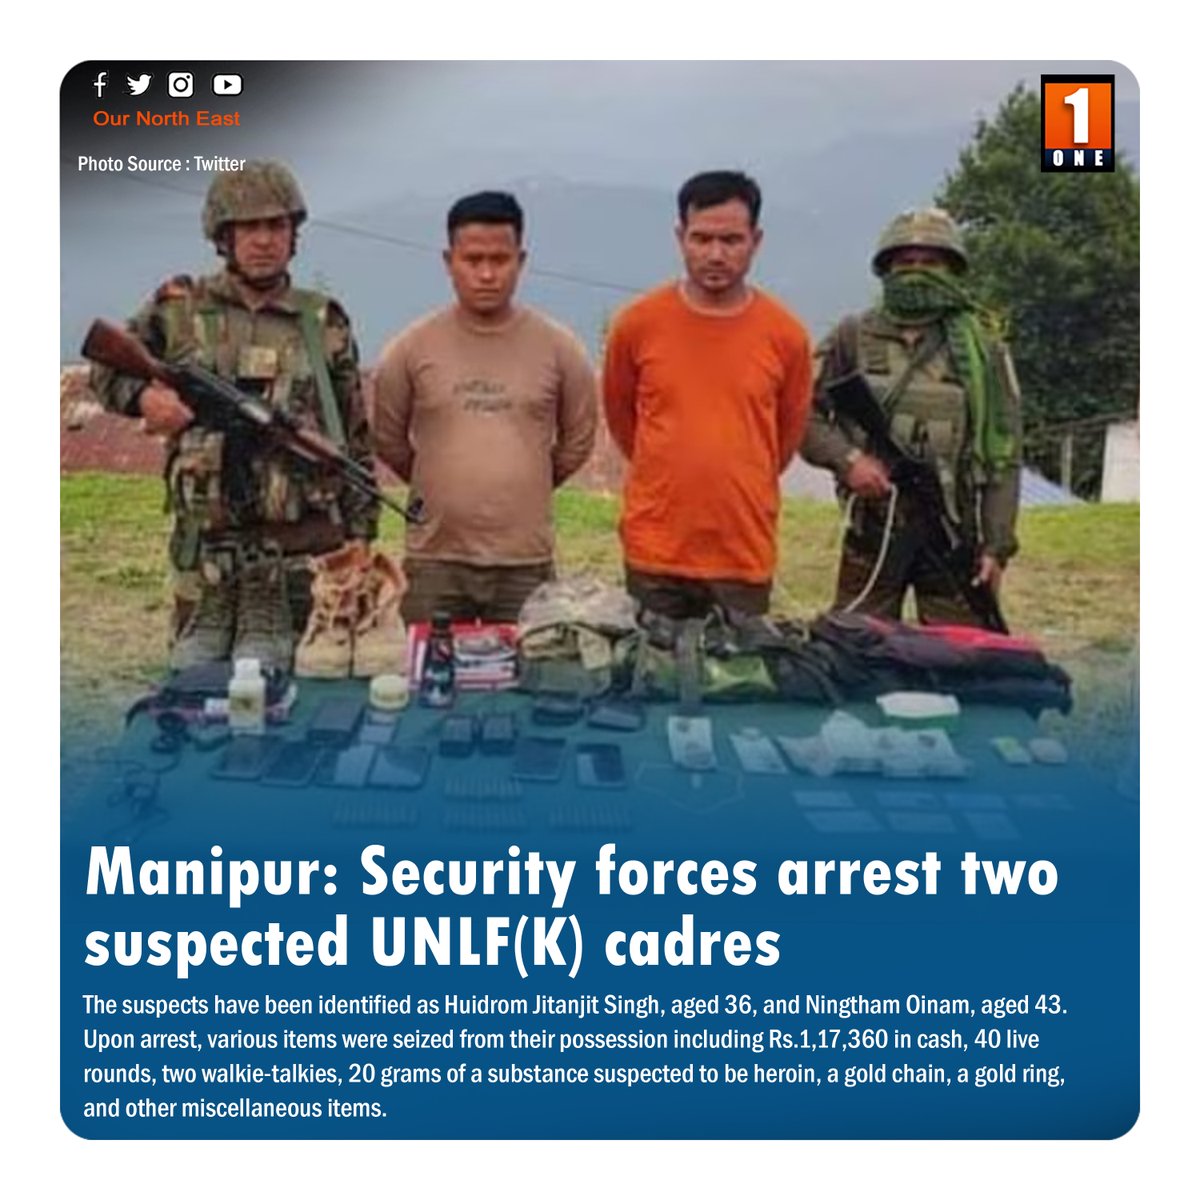 Manipur: Security forces arrest two suspected UNLF(K) cadres

In Manipur, security forces have apprehended two individuals suspected to be members of UNLF(K) on May 8, as per police reports on May 10.

#manipur #securityforces #Arrest